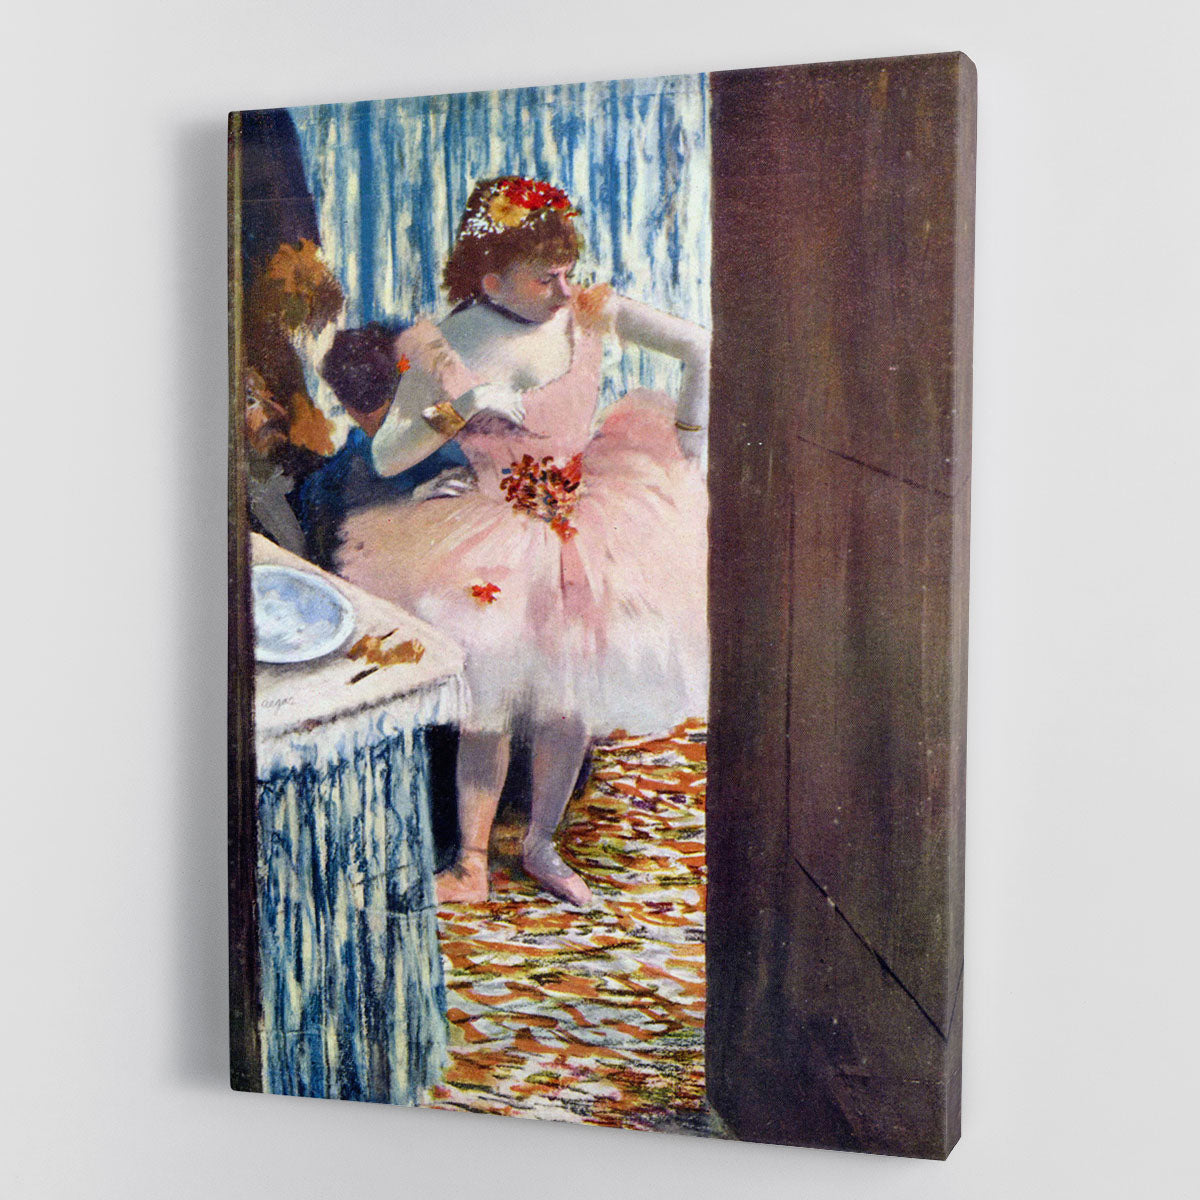 Dancer in the Loge by Degas Canvas Print or Poster - Canvas Art Rocks - 1